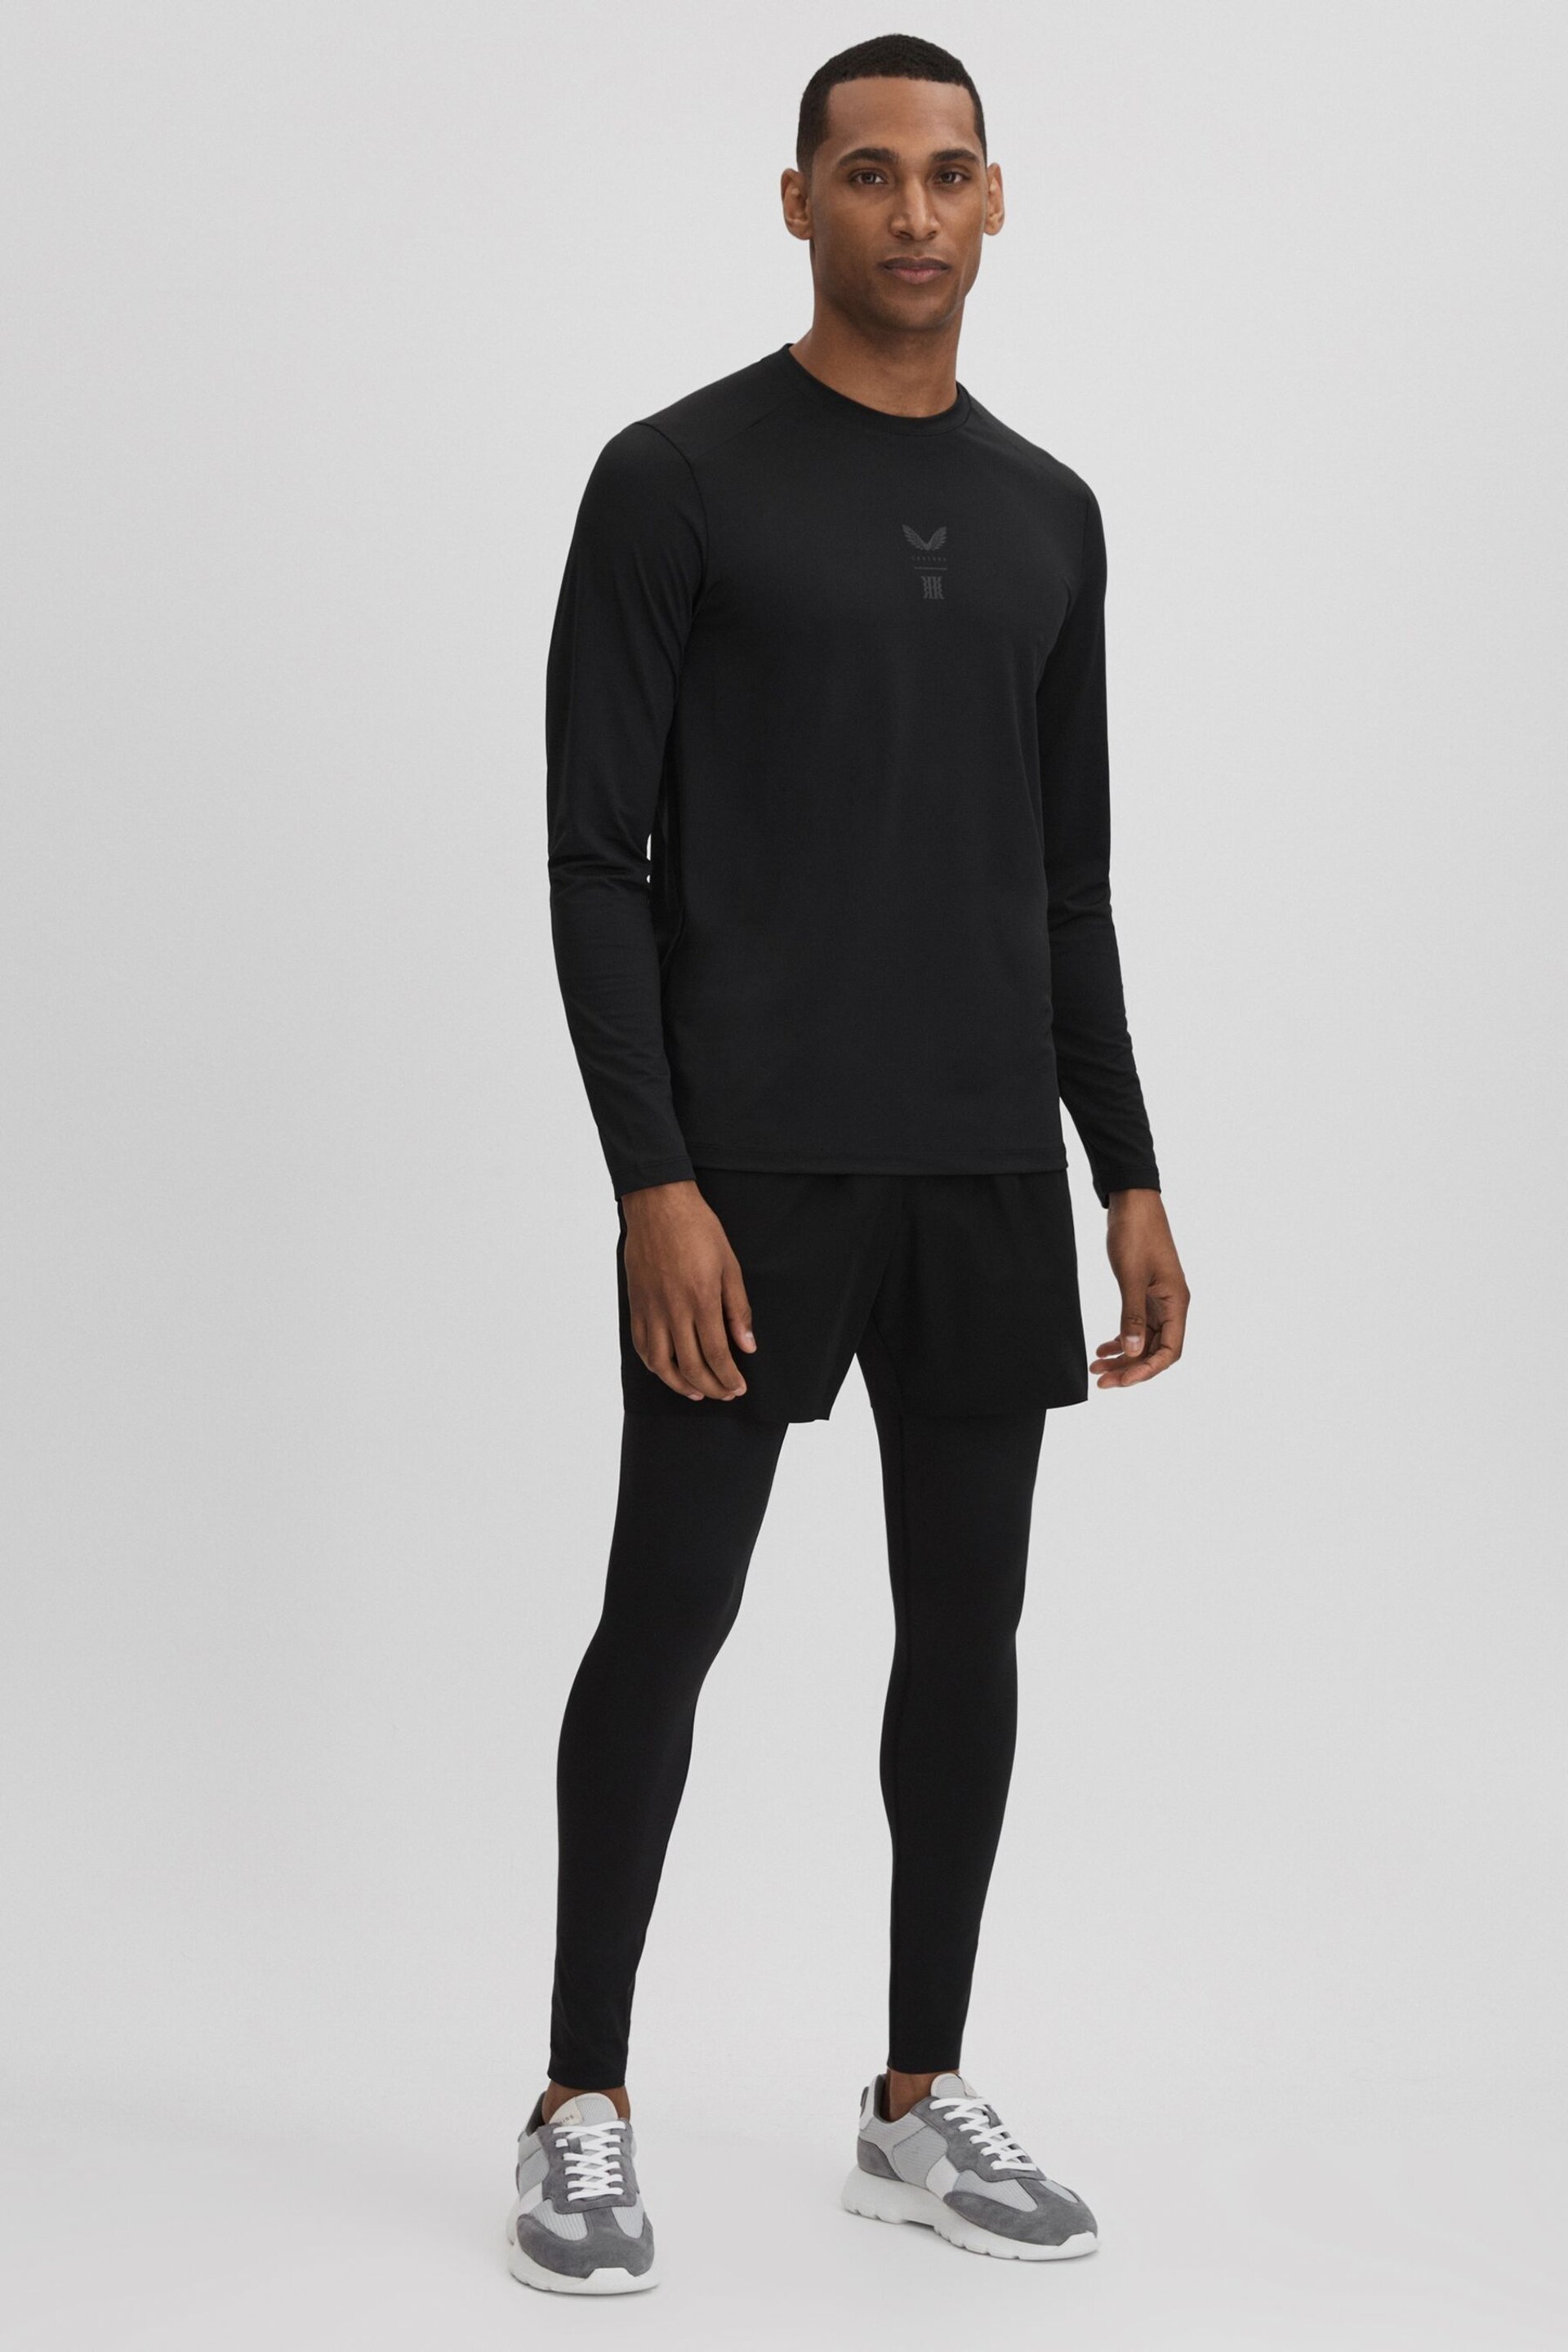 Reiss Onyx Black Holt Castore Performance Tights - Image 3 of 8